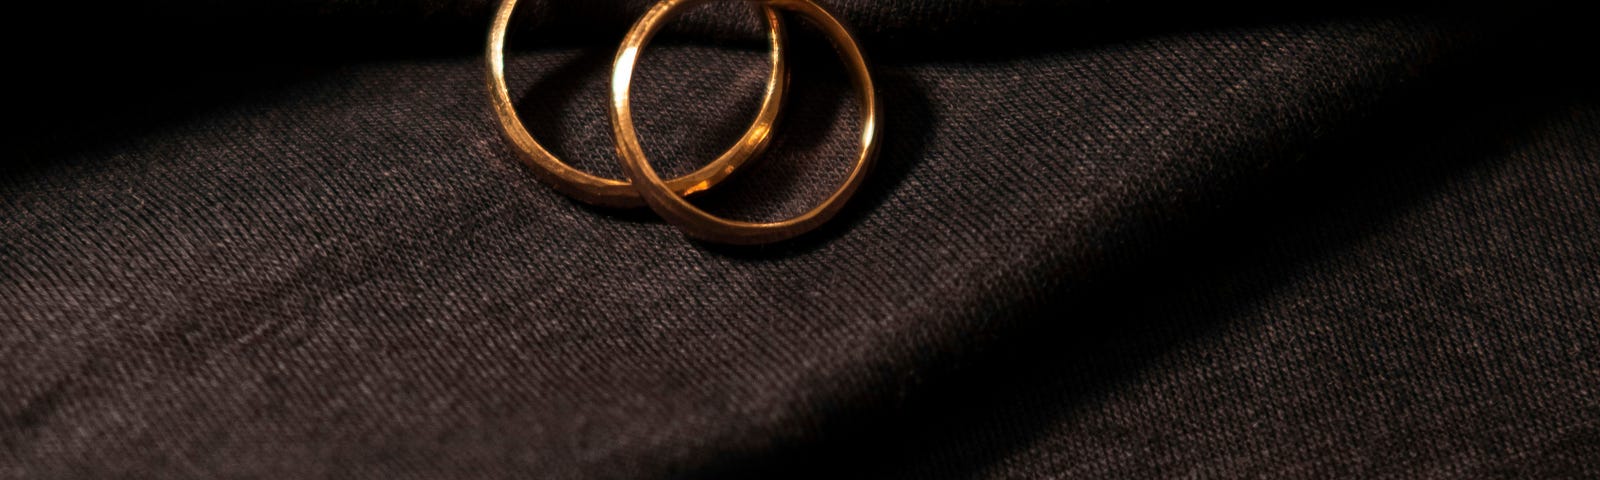 two gold wedding bands on a black cloth